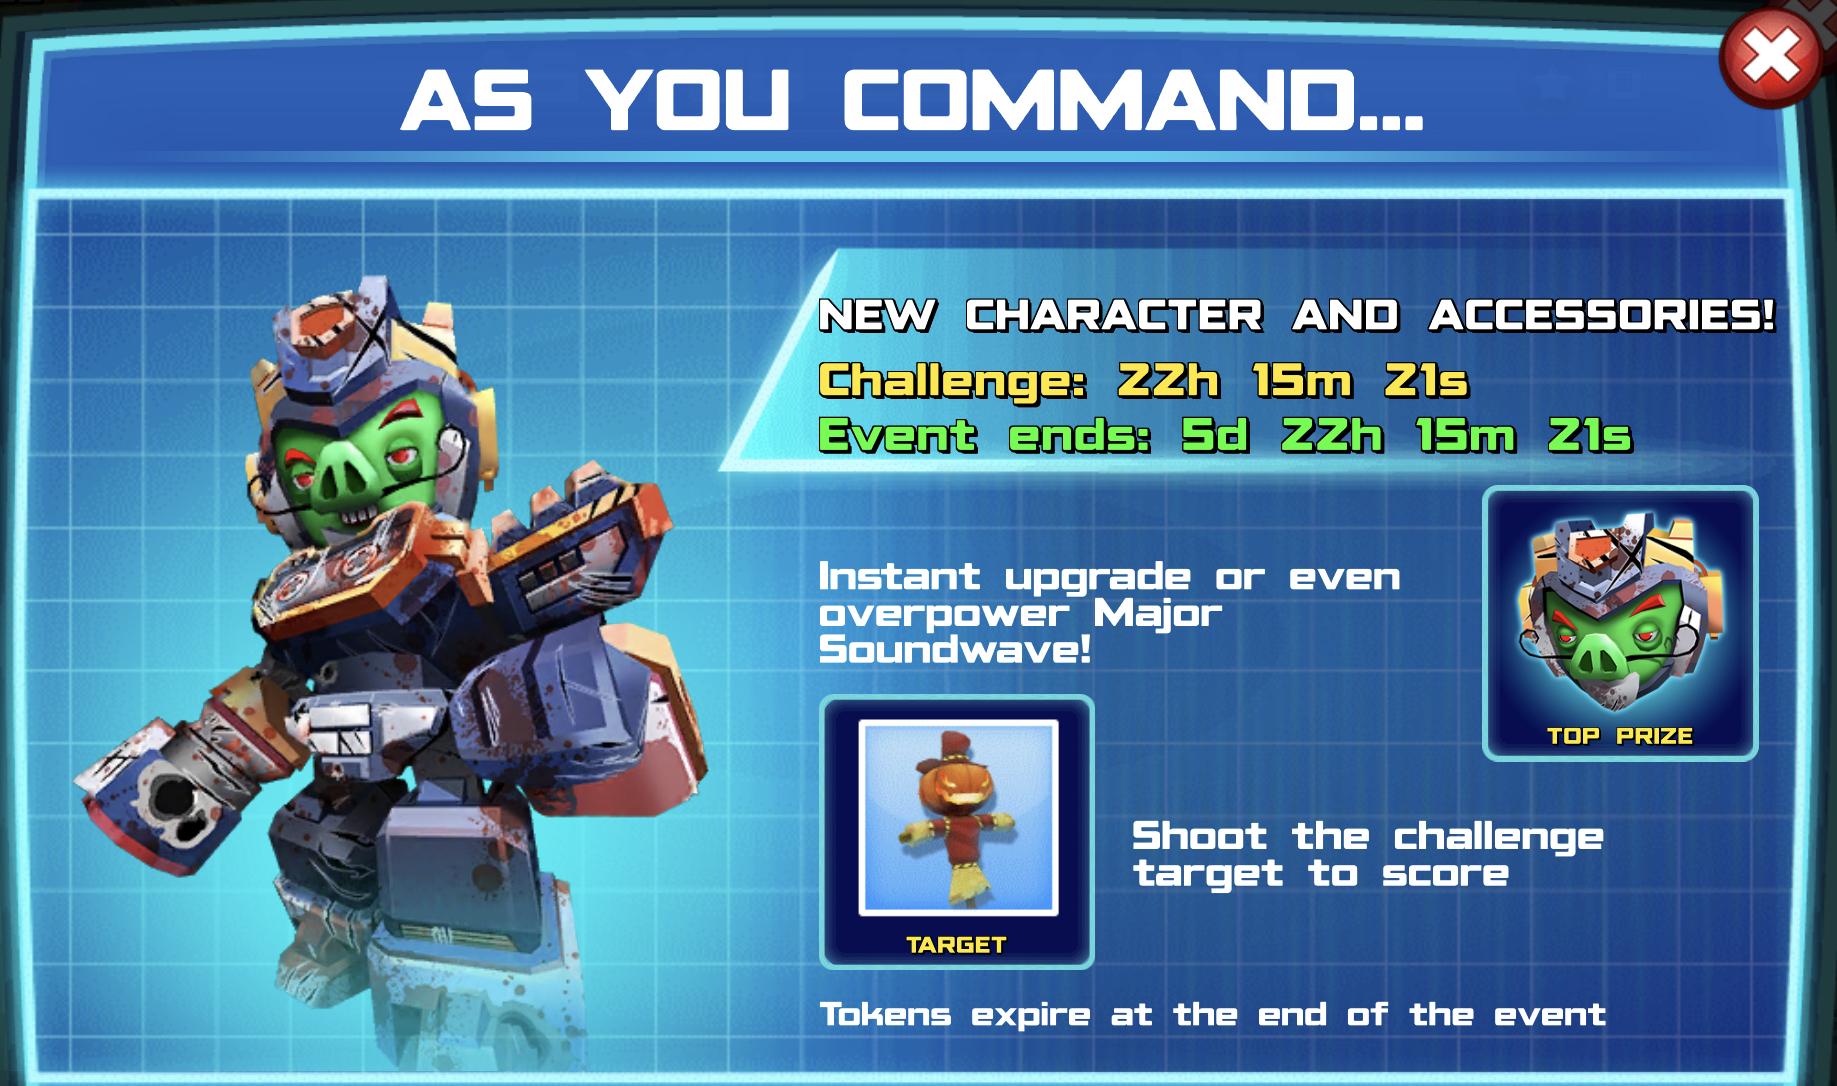 The event banner for As You Command…